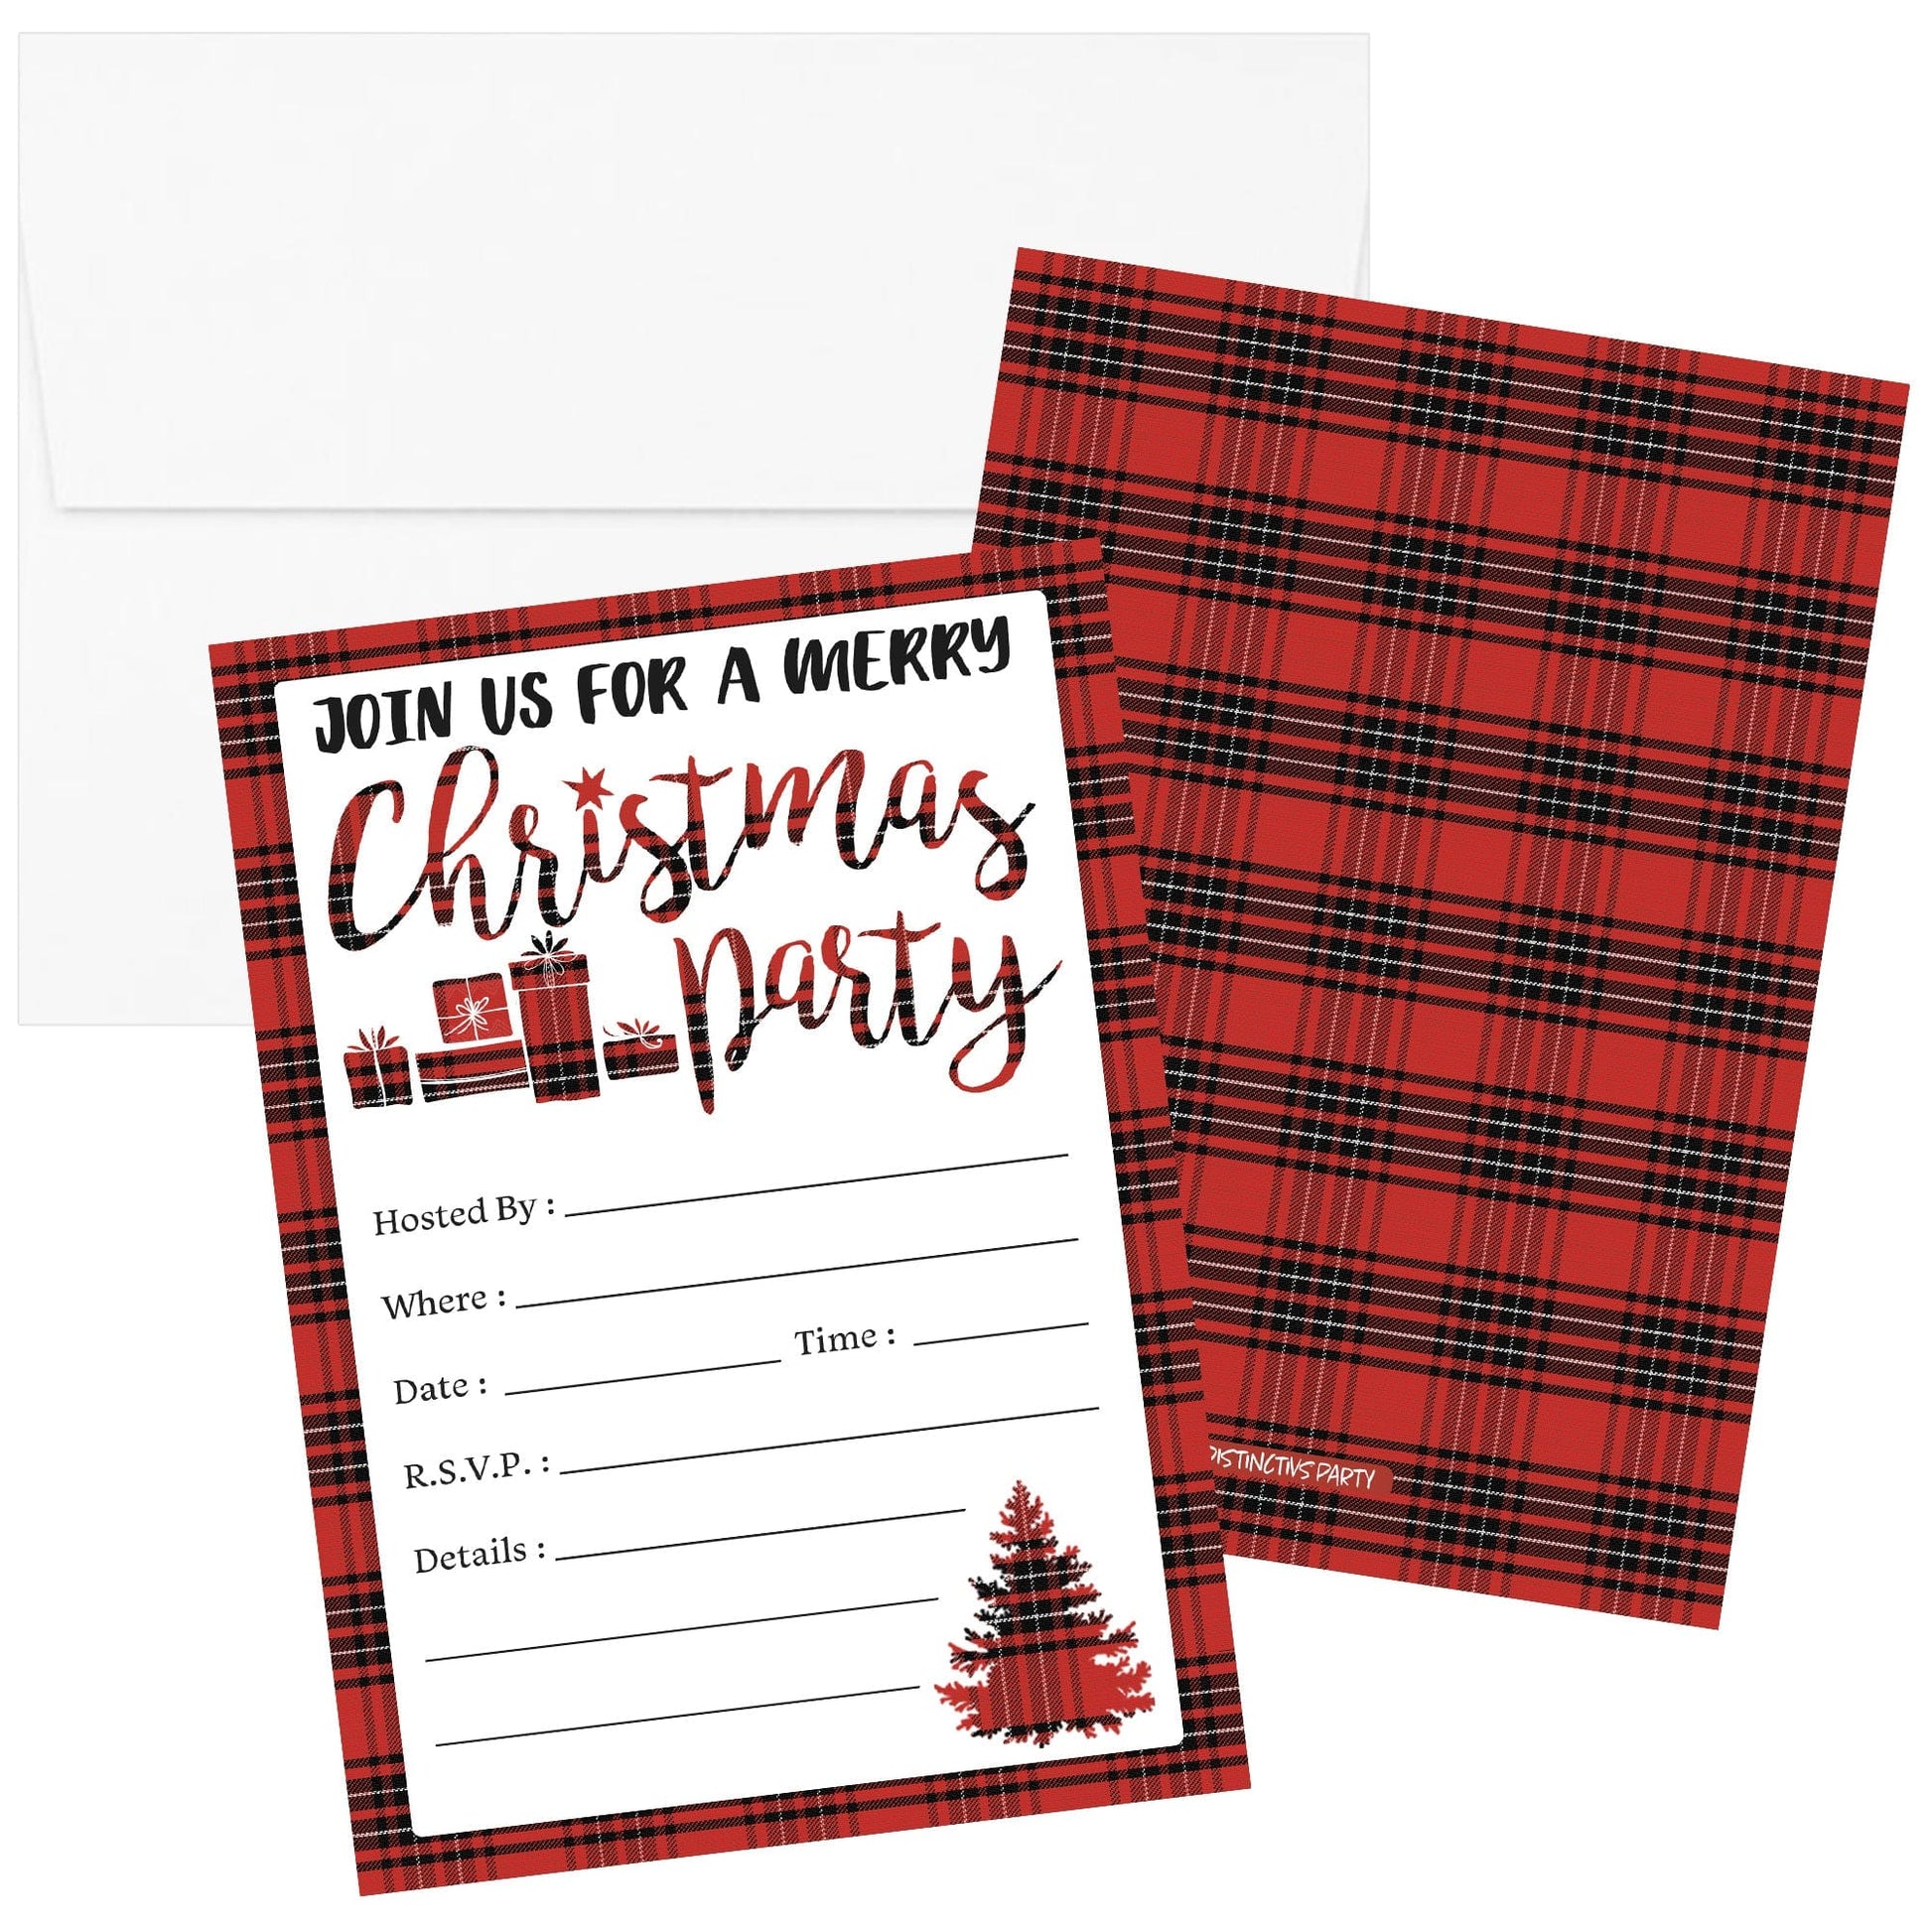 Plaid Christmas Party Invitations - 12 Cards with Envelopes